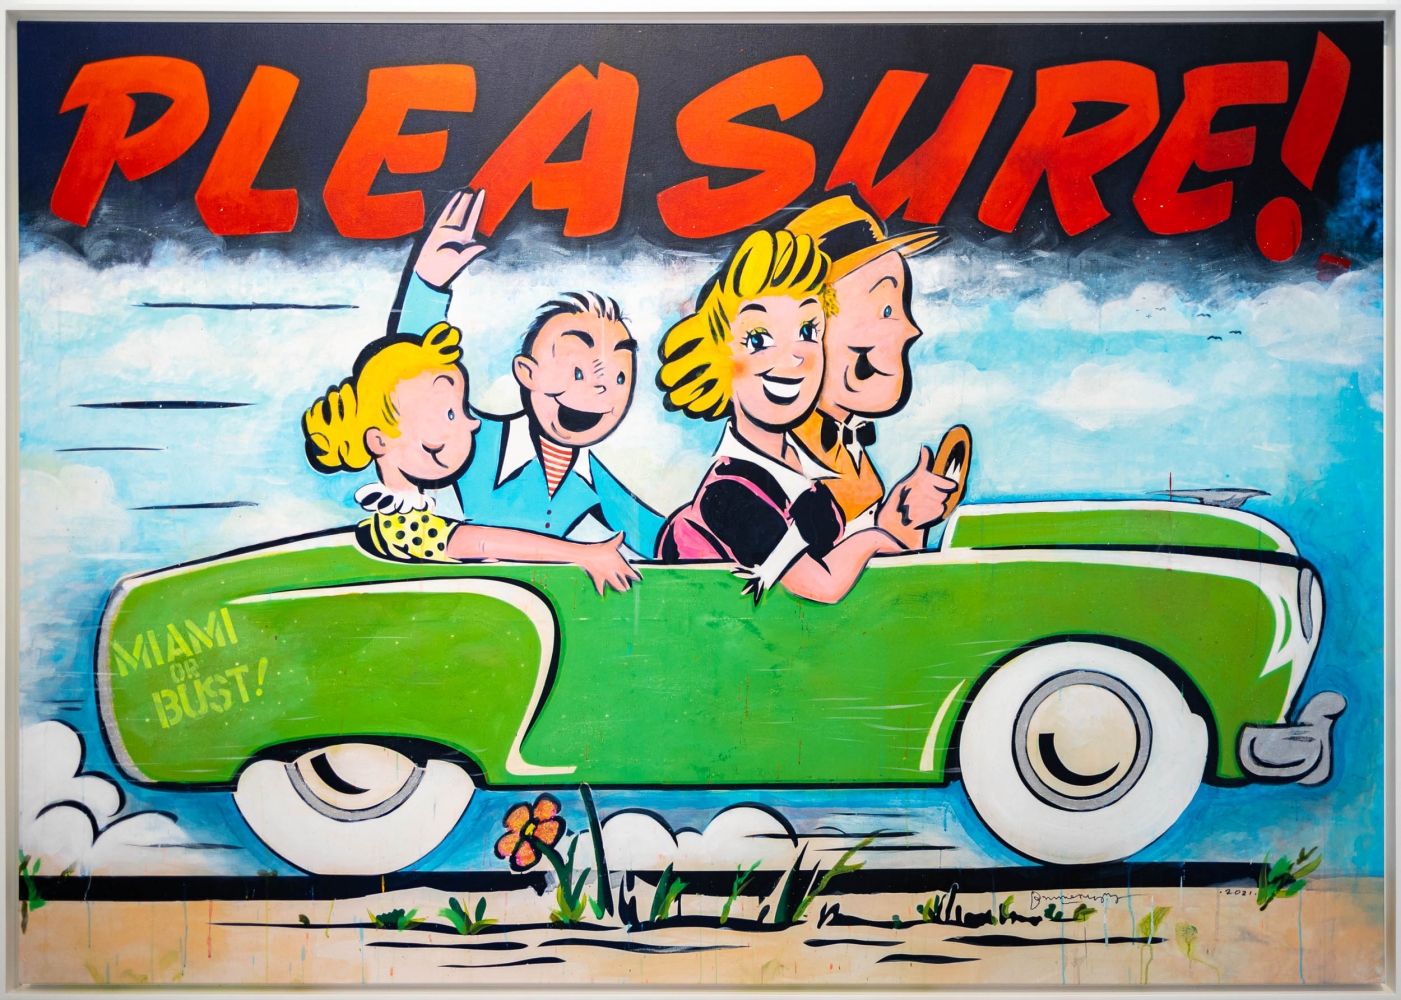 Bruce Helander, Pleasure, 2021, acrylic painting on canvas, 57.5 x 57.5 inches, contemporary art for sale